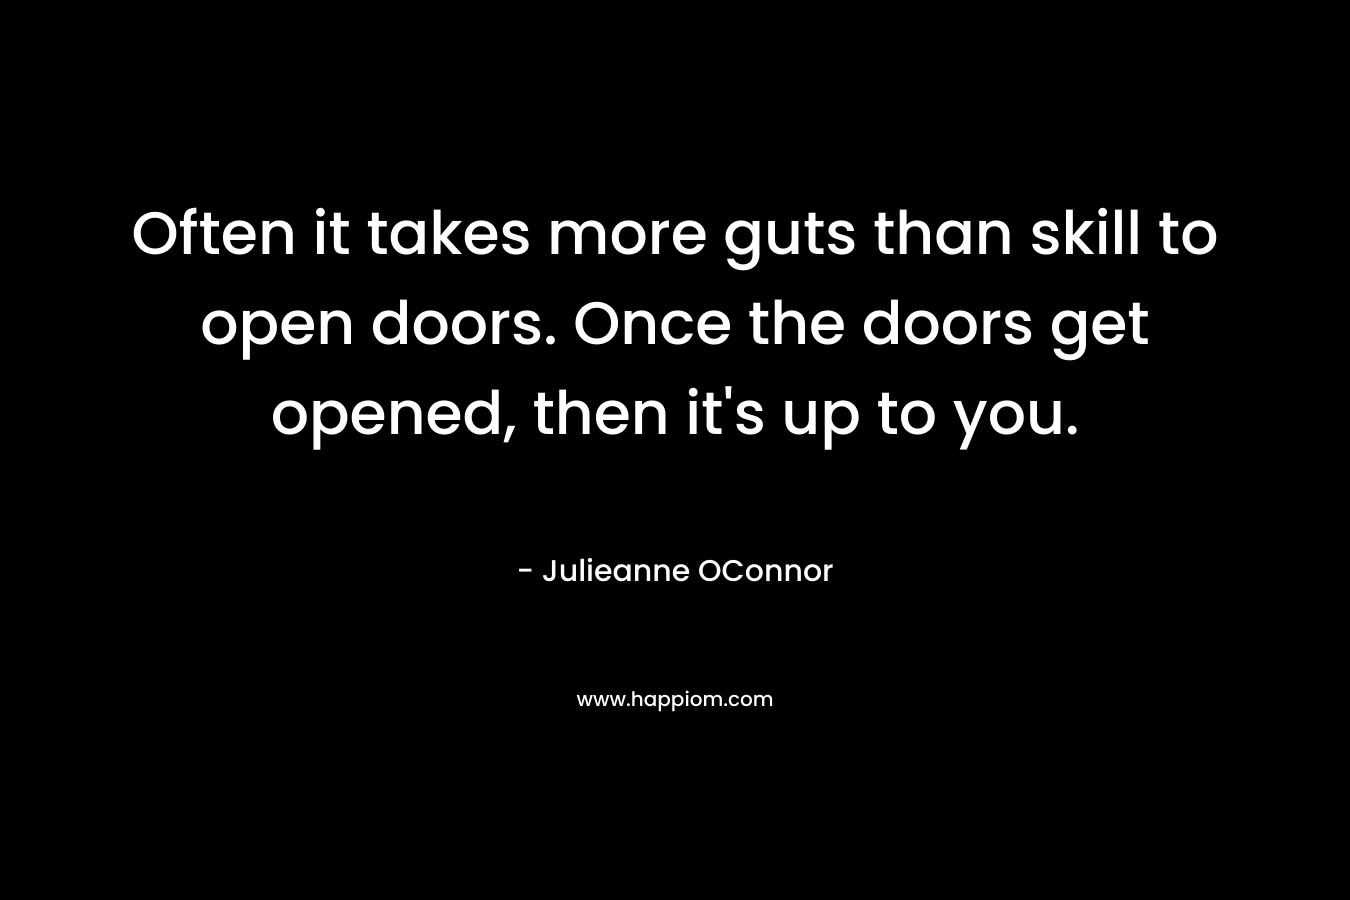 Often it takes more guts than skill to open doors. Once the doors get opened, then it's up to you.